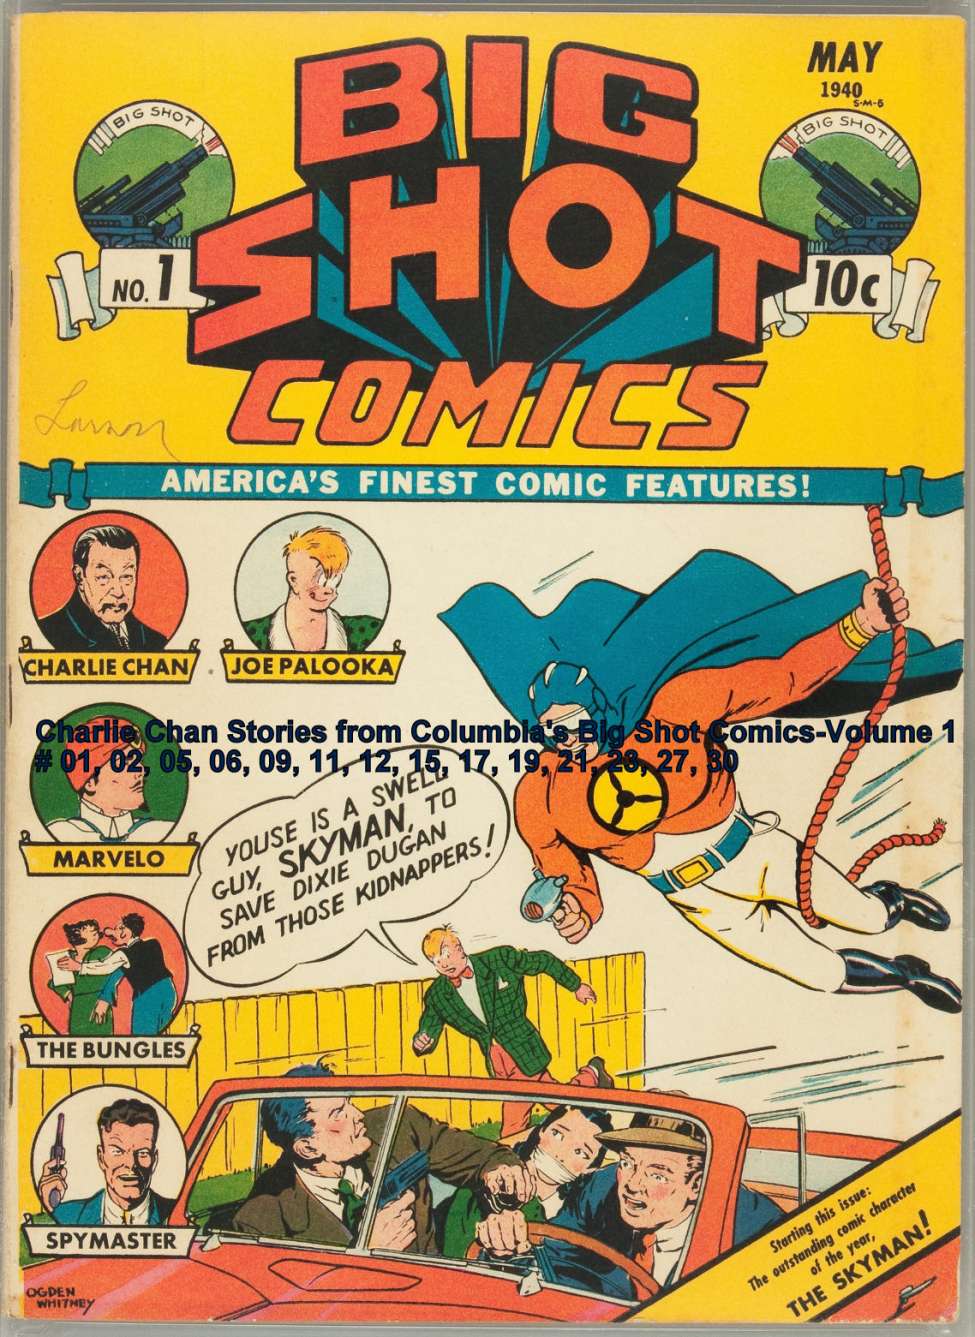 Comic Book Cover For Charlie Chan Stories from Columbia's Big Shot Comics-Volume 1